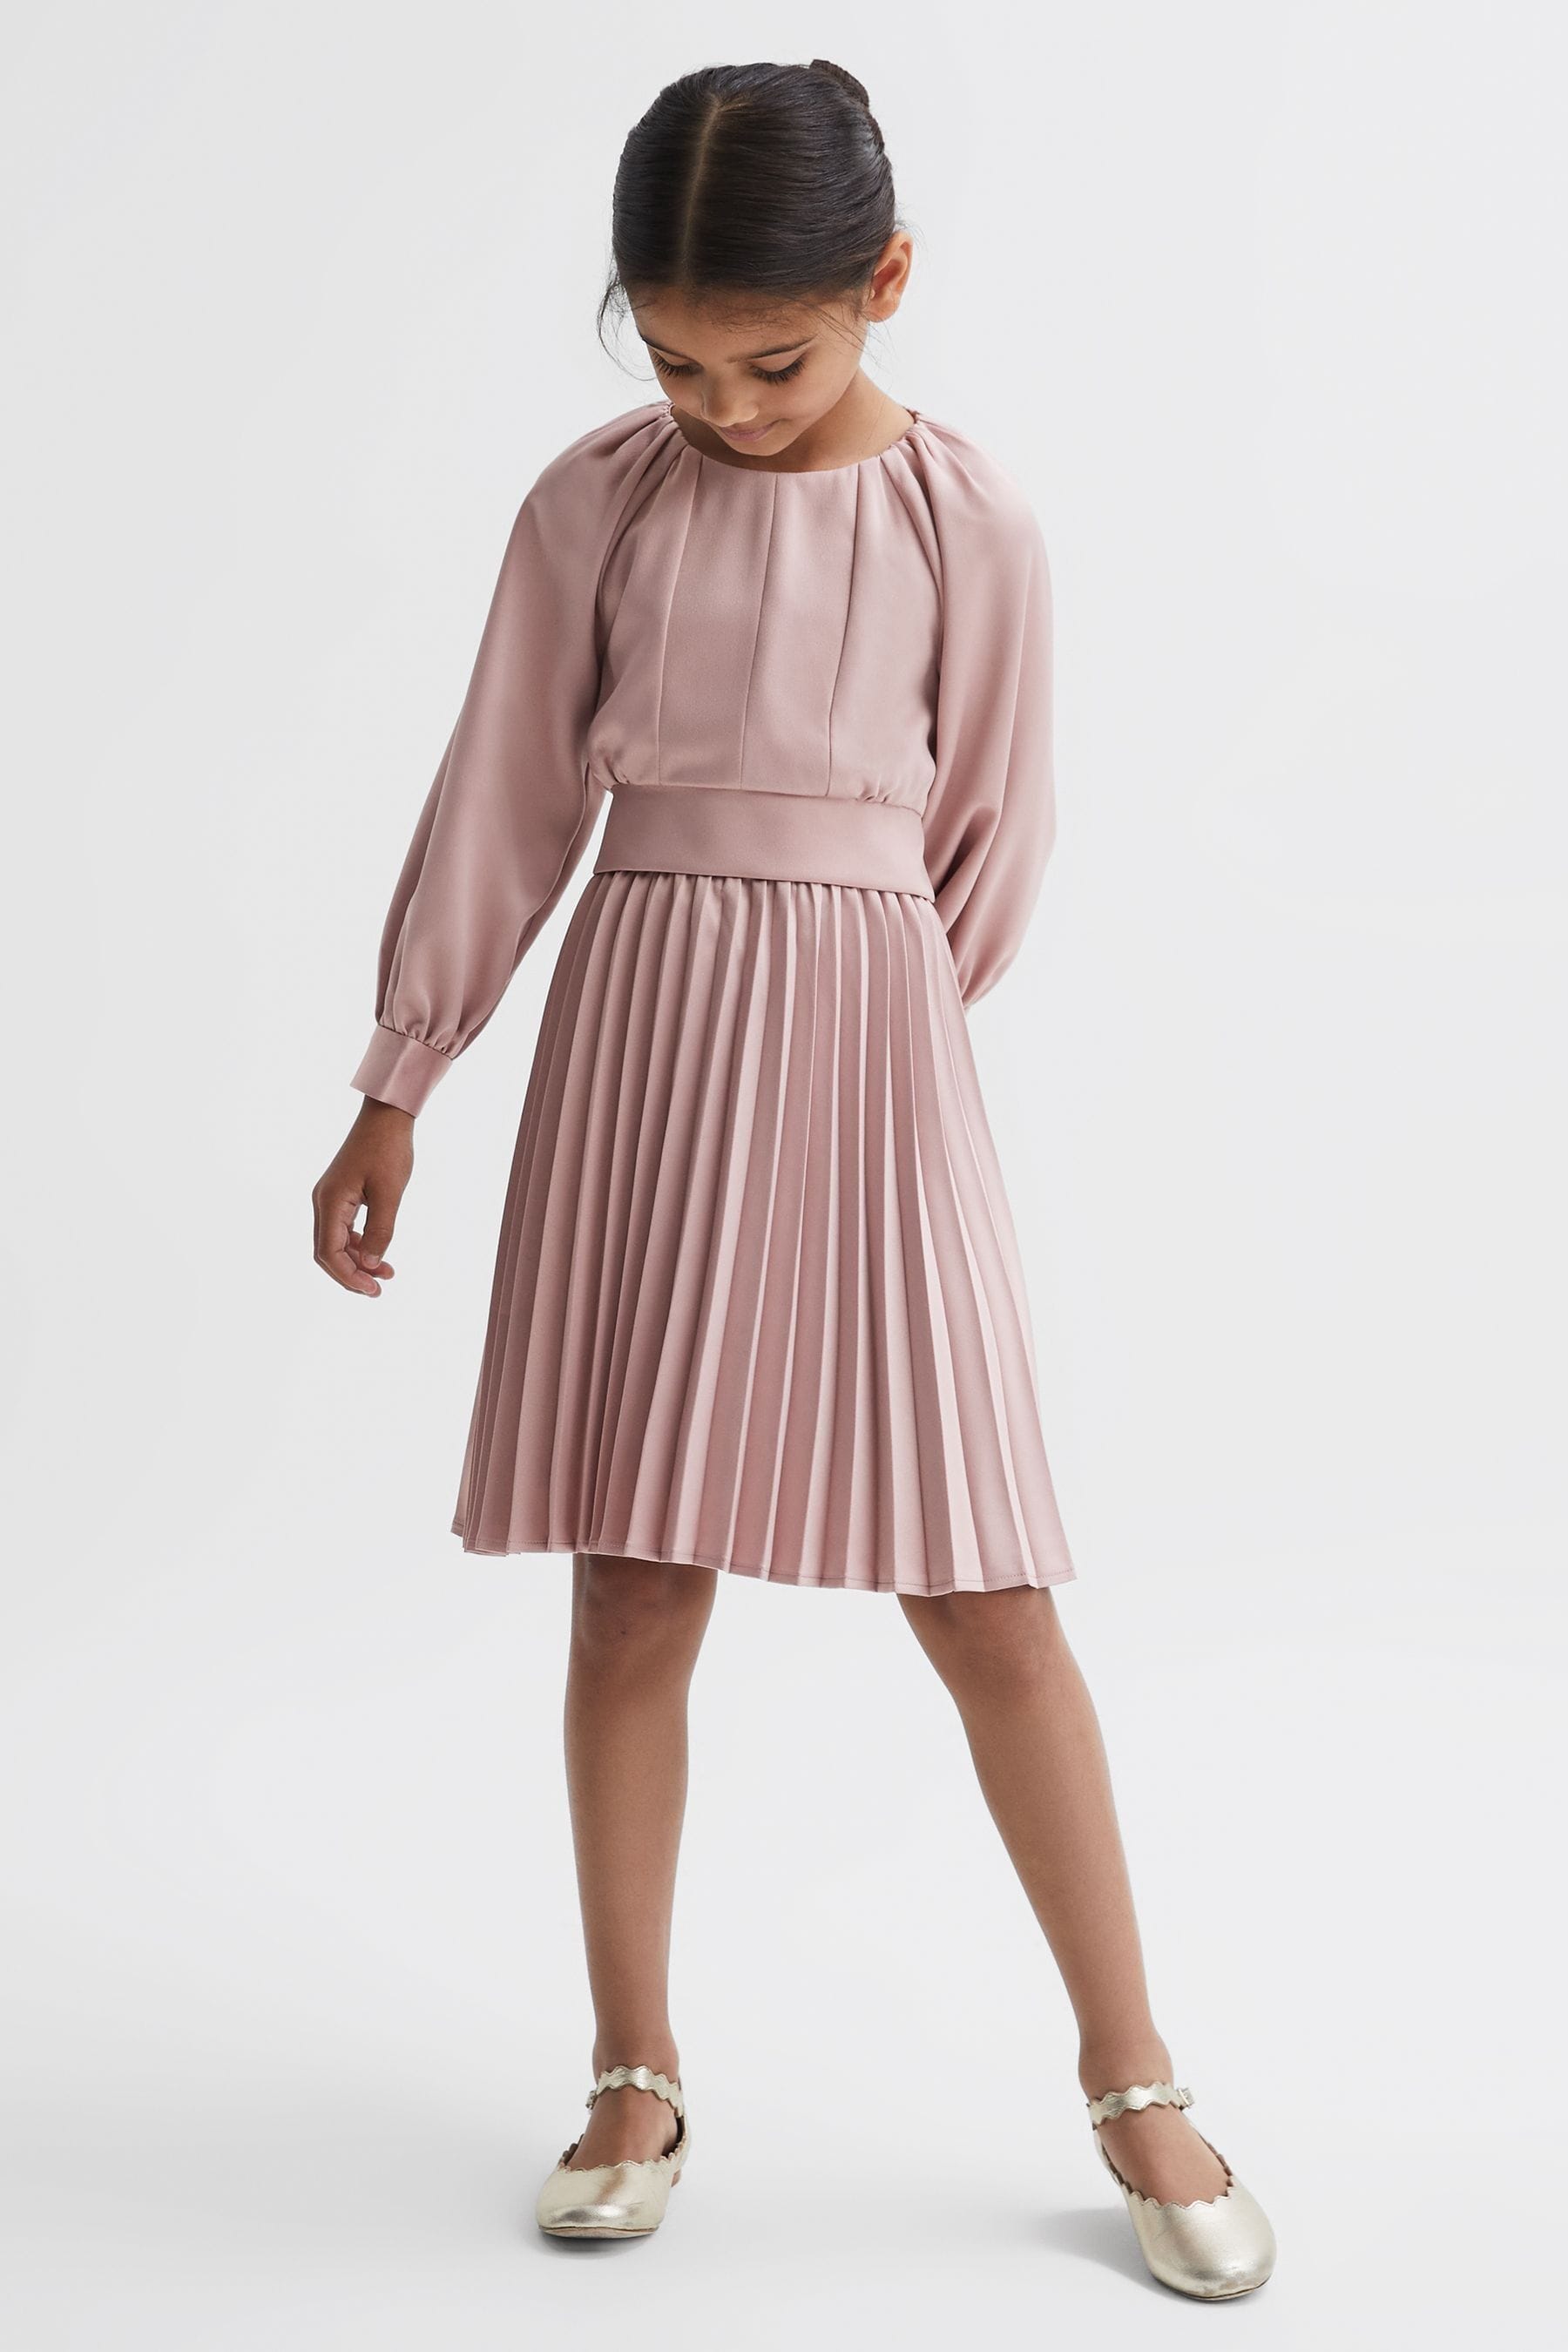 Reiss Kids' Molly - Pink Junior Cropped Pleated Blouse, Age 5-6 Years